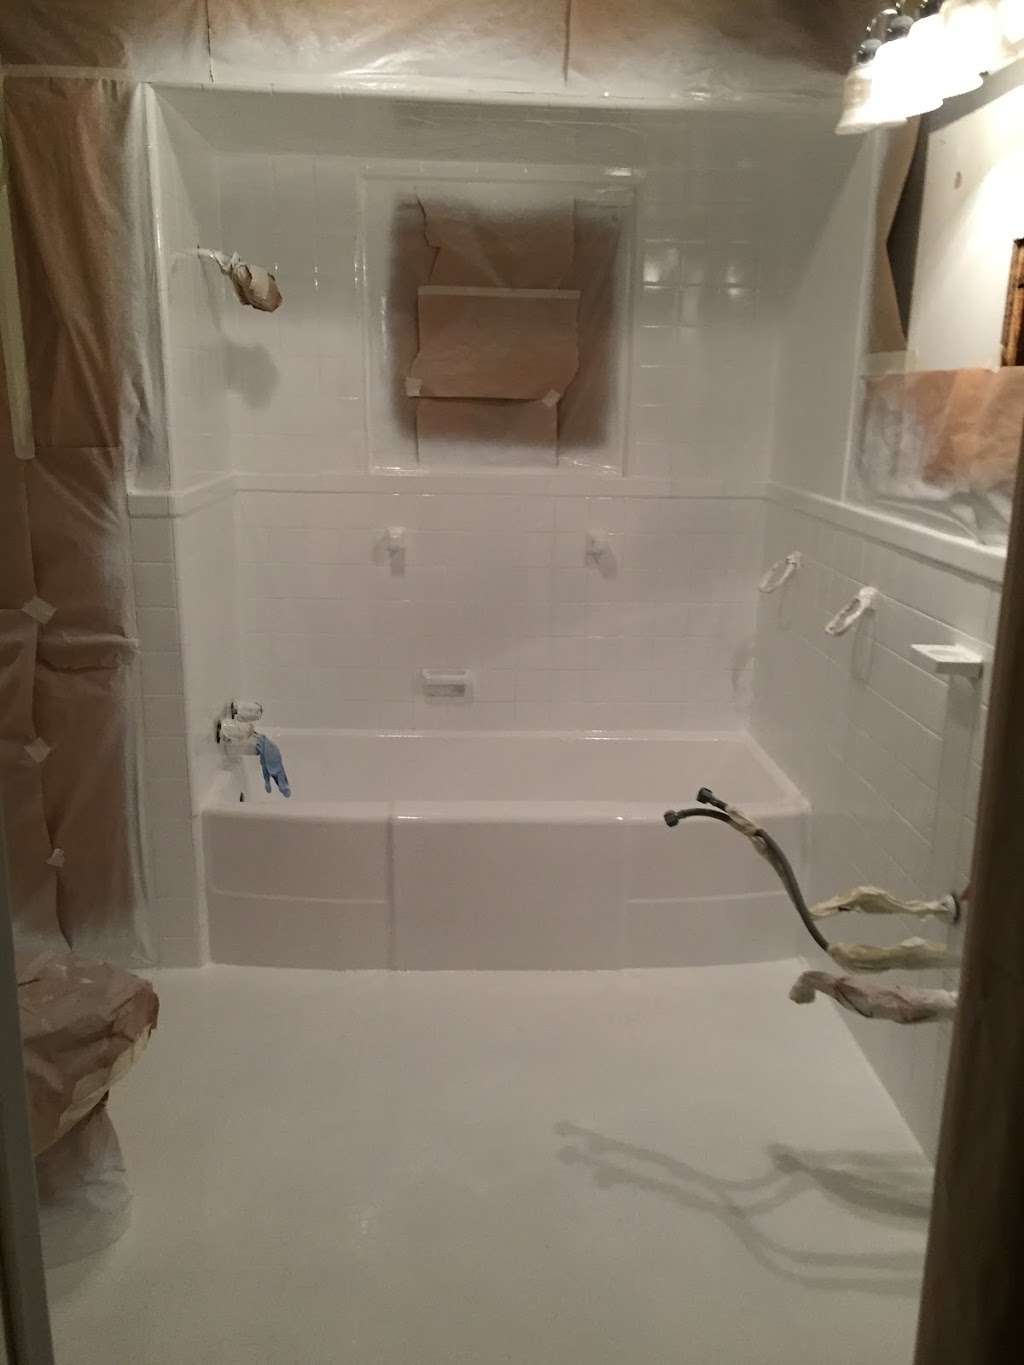 A+Bathtub and Kitchen refinishing,repair | 15109 Bennette Woods Rd, Conroe, TX 77302 | Phone: (832) 527-9647